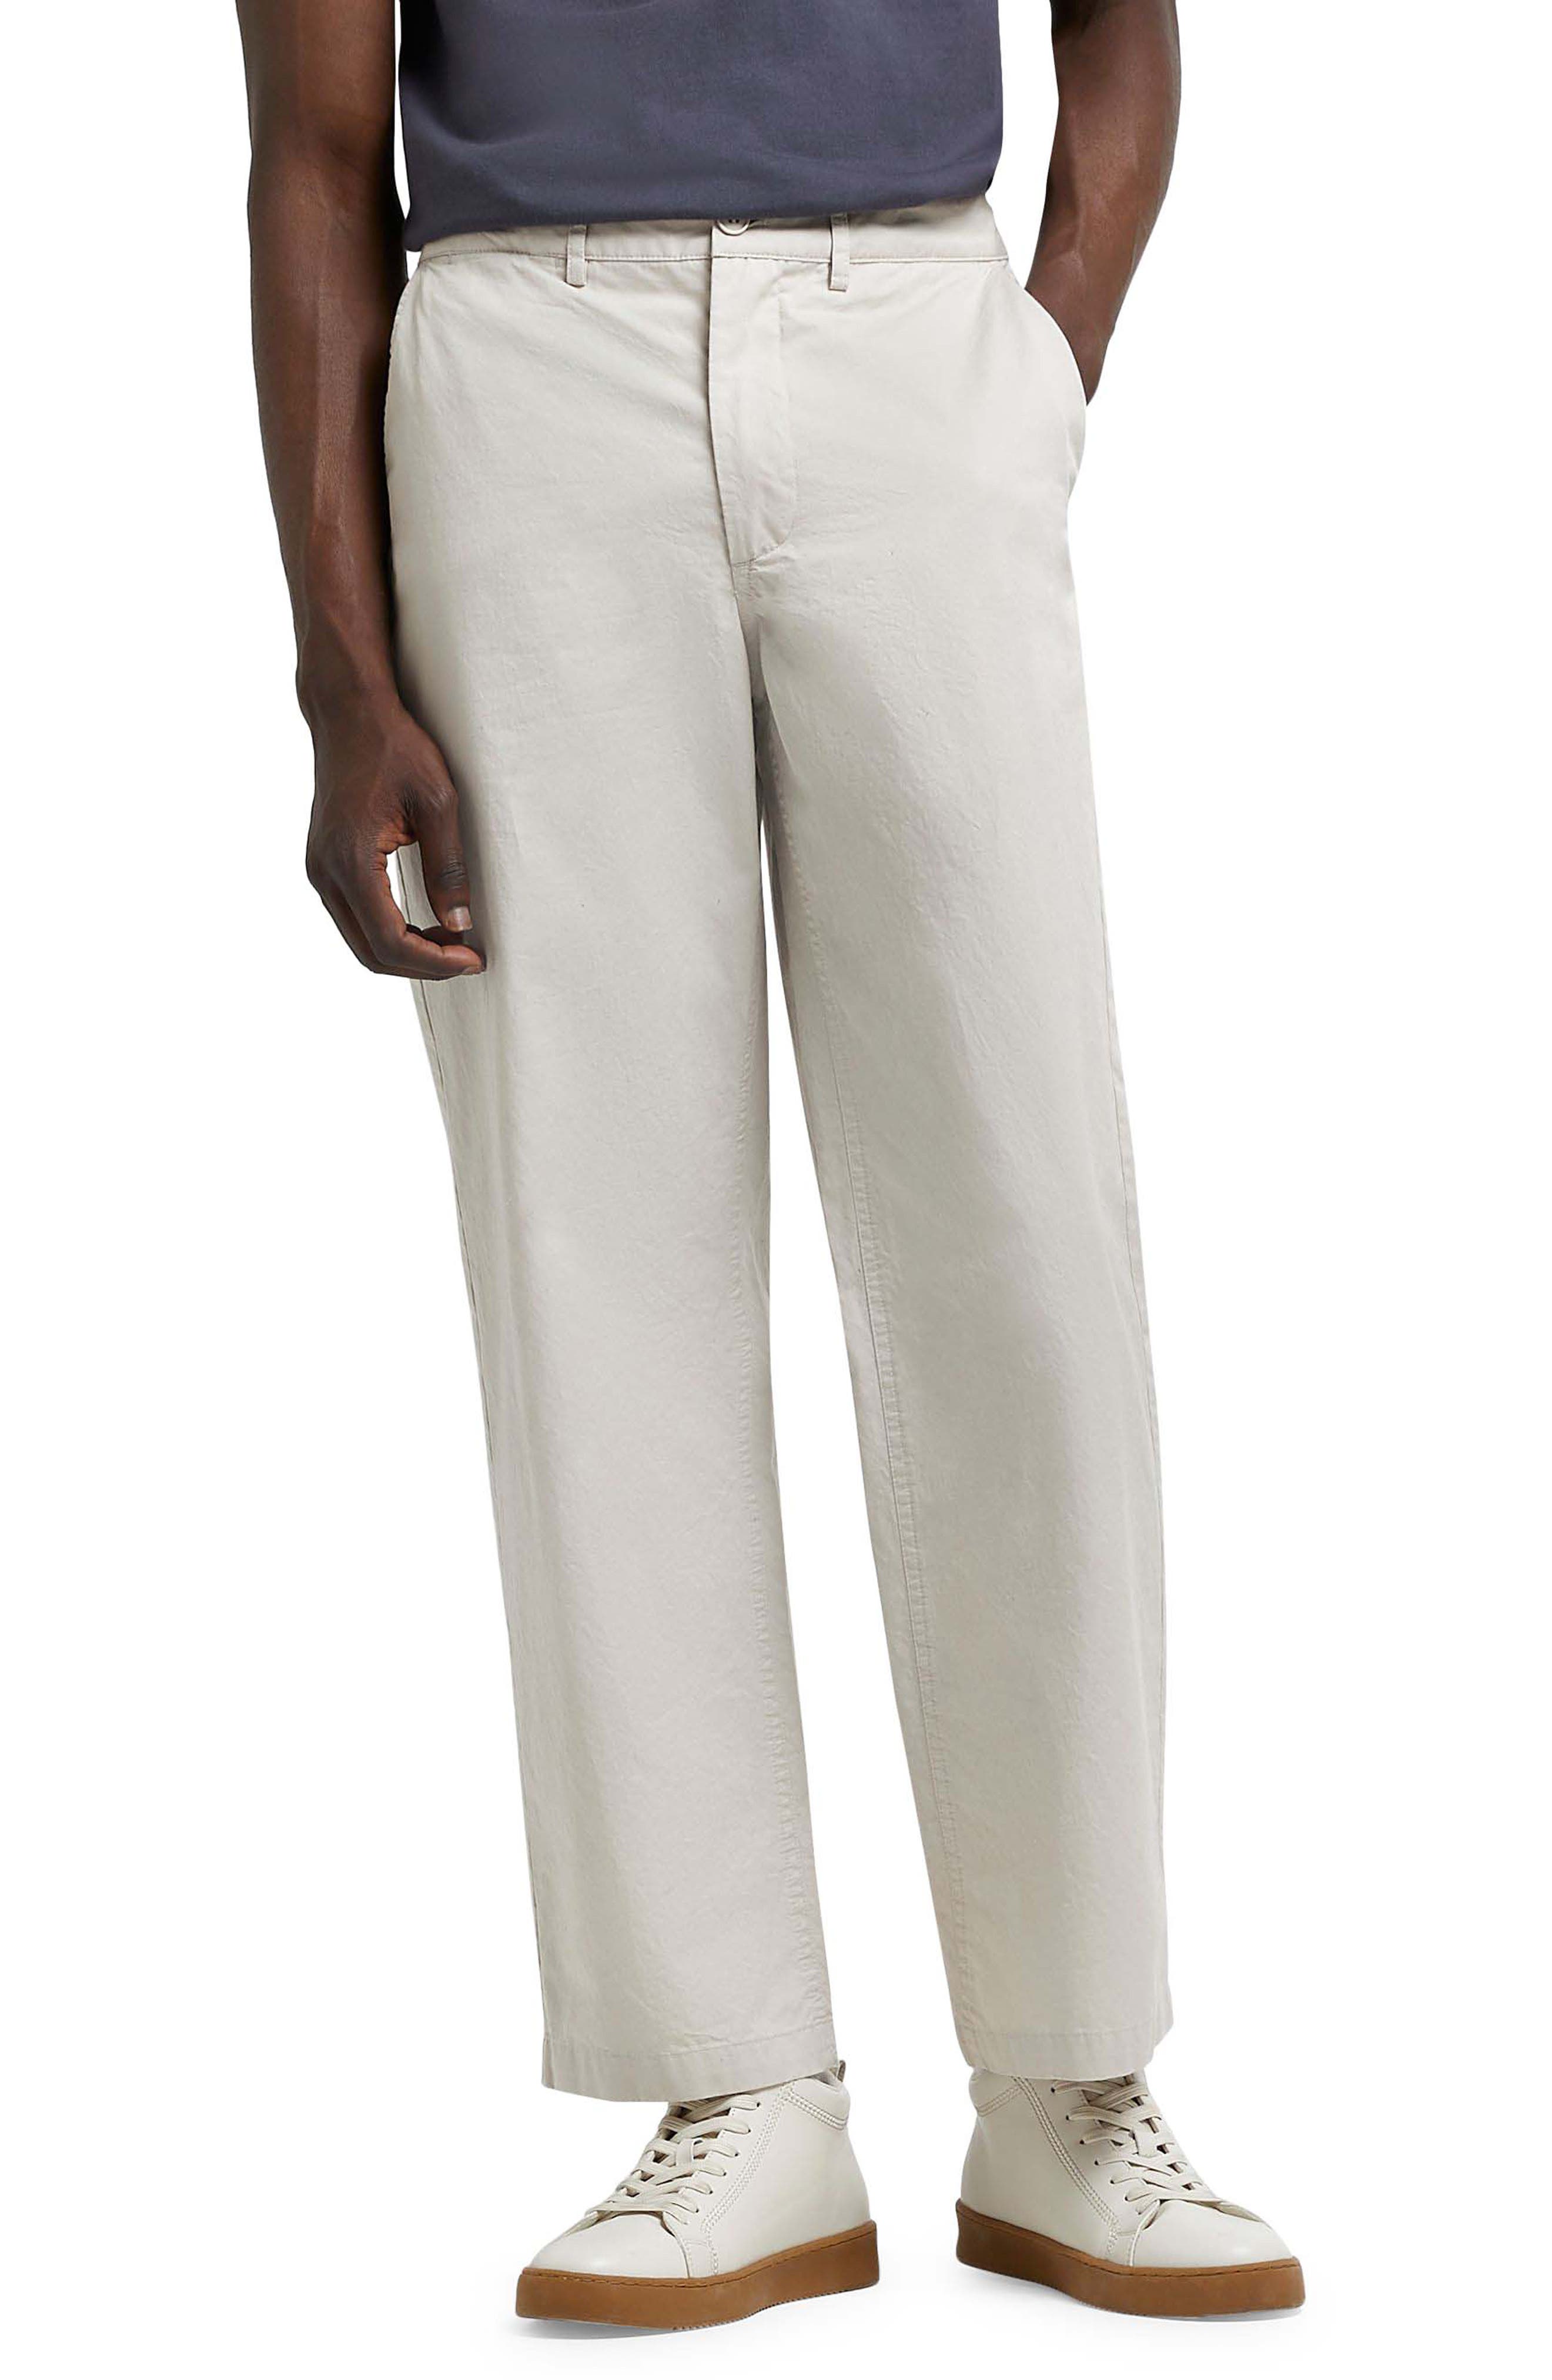 Mfasica Mens Relaxed-Fit Pure Color Summer Leisure Flat Front Trousers